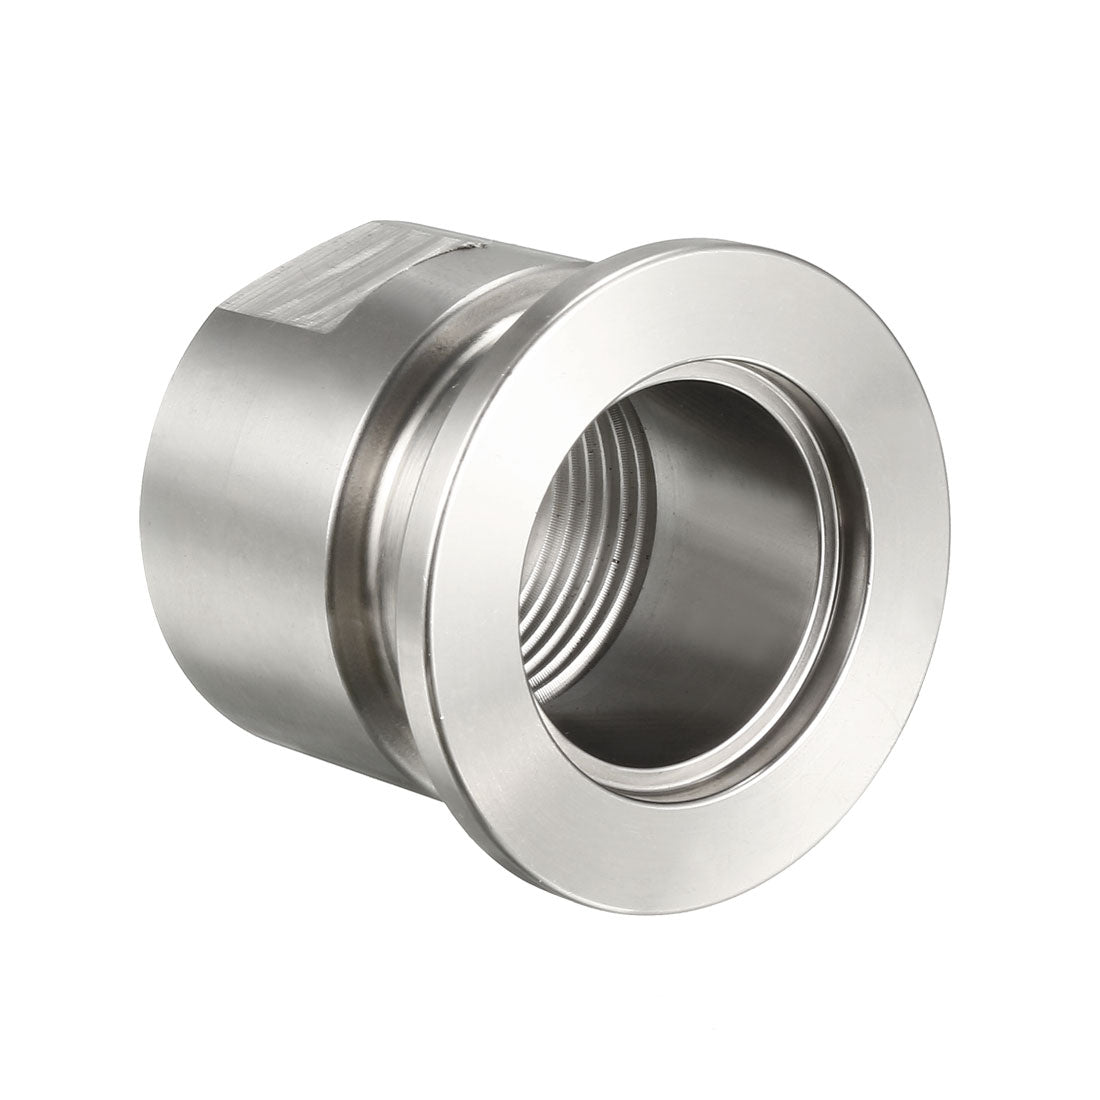 uxcell Uxcell Pipe Fitting KF25 Female Threaded 3/4 PT to  Clamp OD 40mm Ferrule